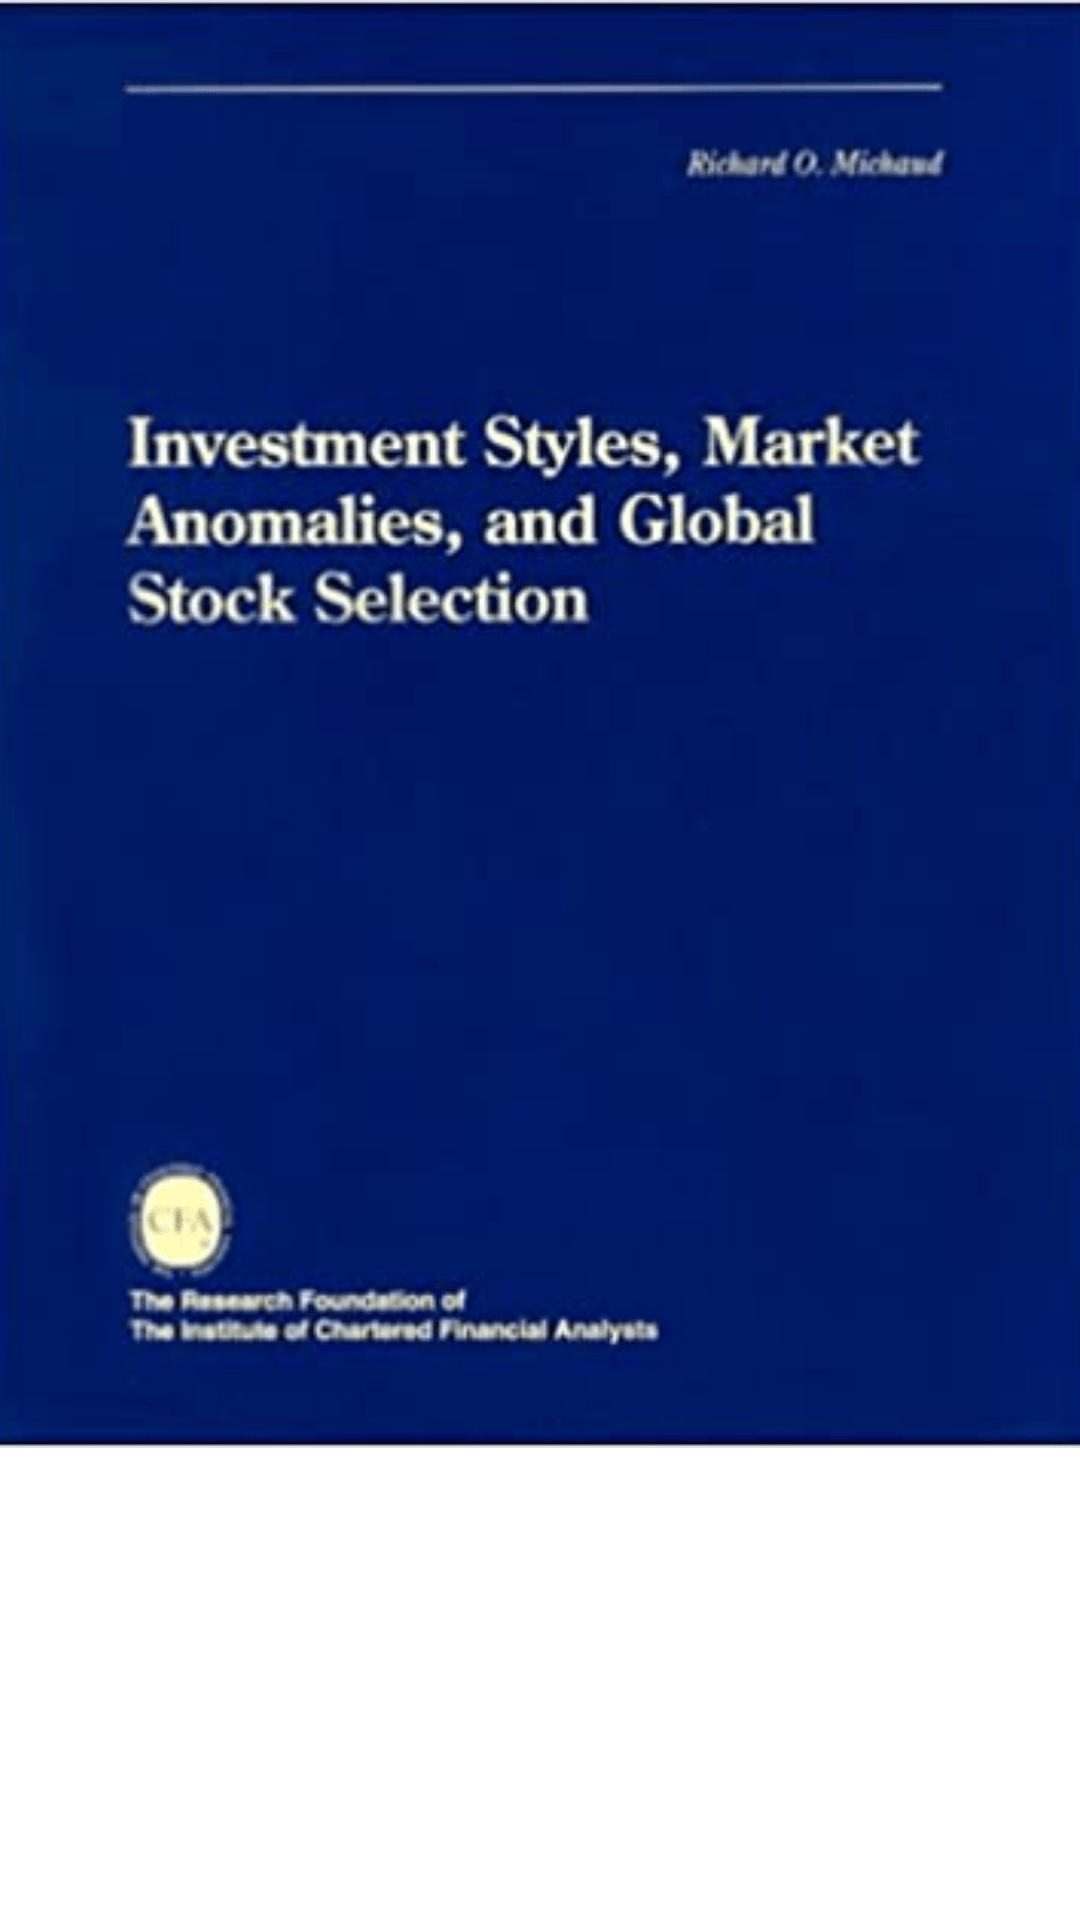 Investment Styles, Market Anomalies, and Global Stock Selection